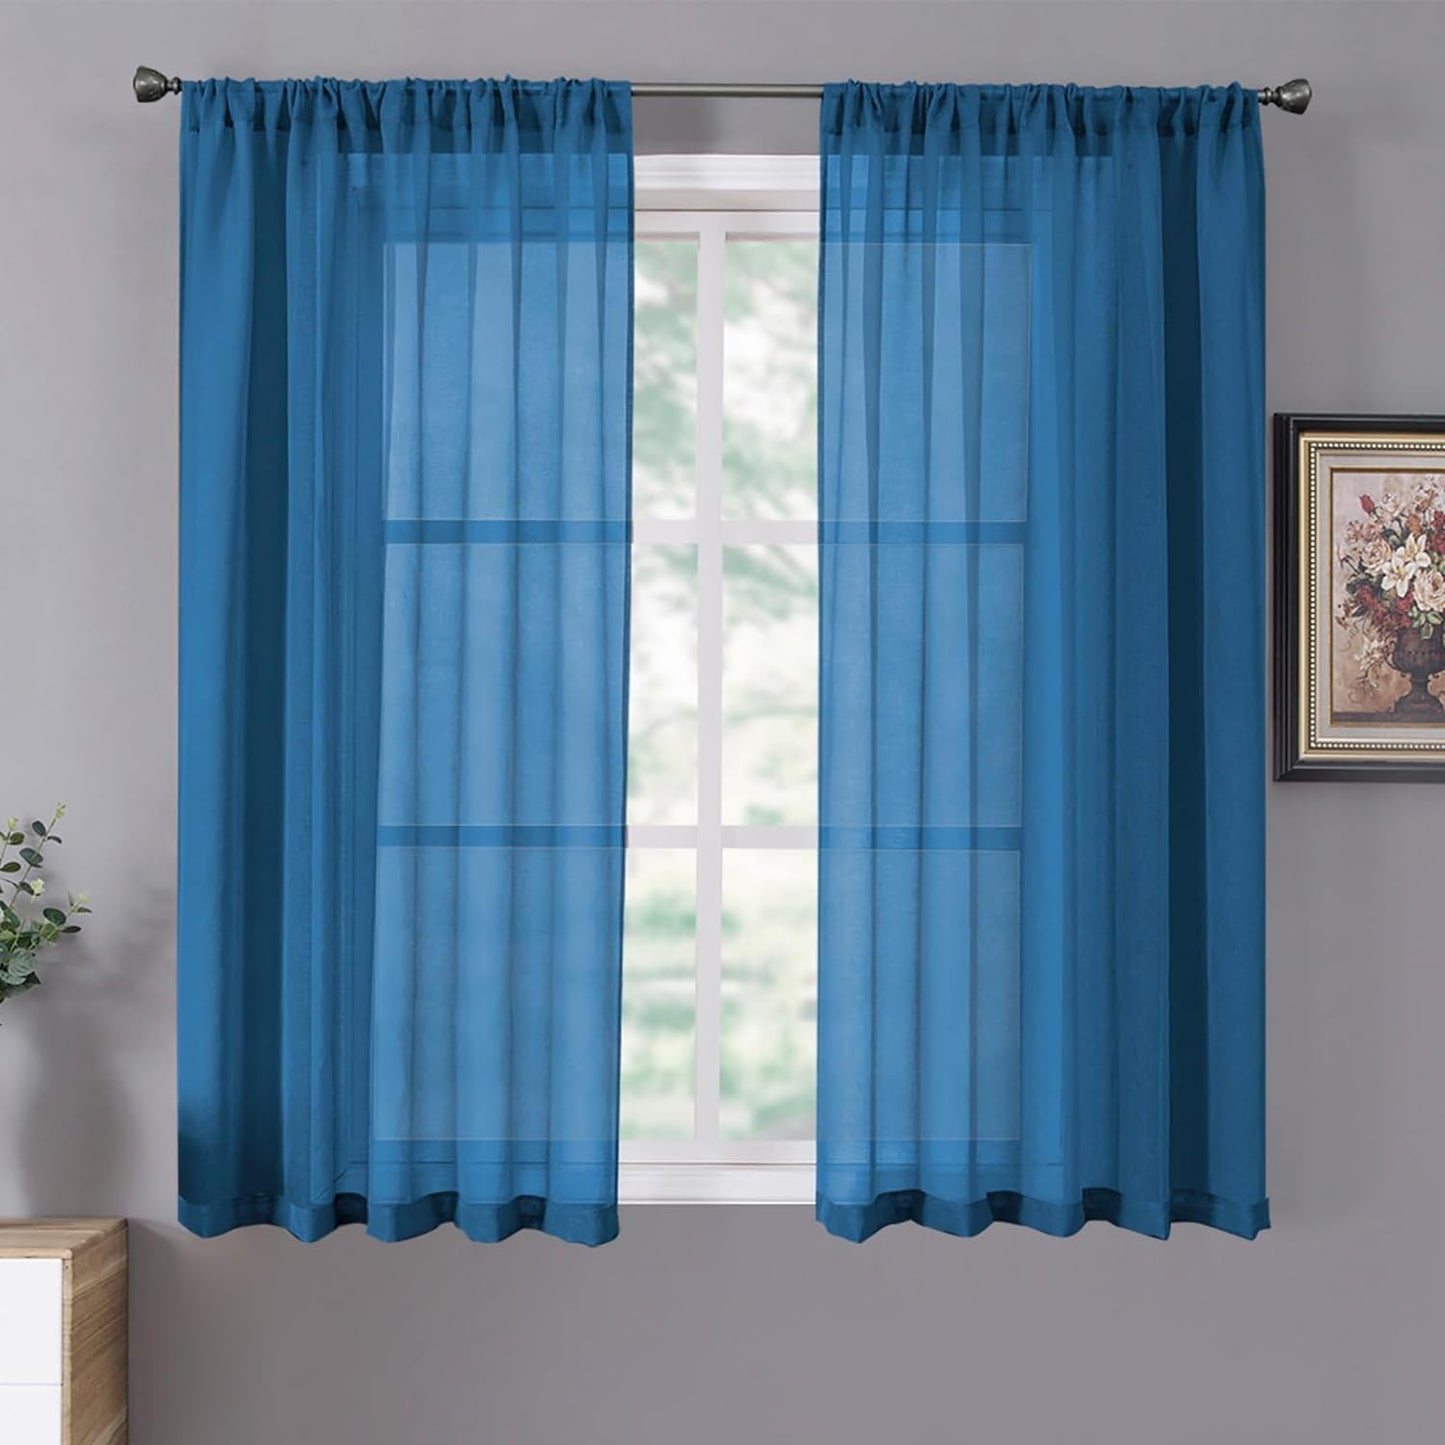 Tollpiz Short Sheer Curtains Linen Textured Bedroom Curtain Sheers Light Filtering Rod Pocket Voile Curtains for Living Room, 54 X 45 Inches Long, White, Set of 2 Panels  Tollpiz Tex Classic Blue 38"W X 45"L 